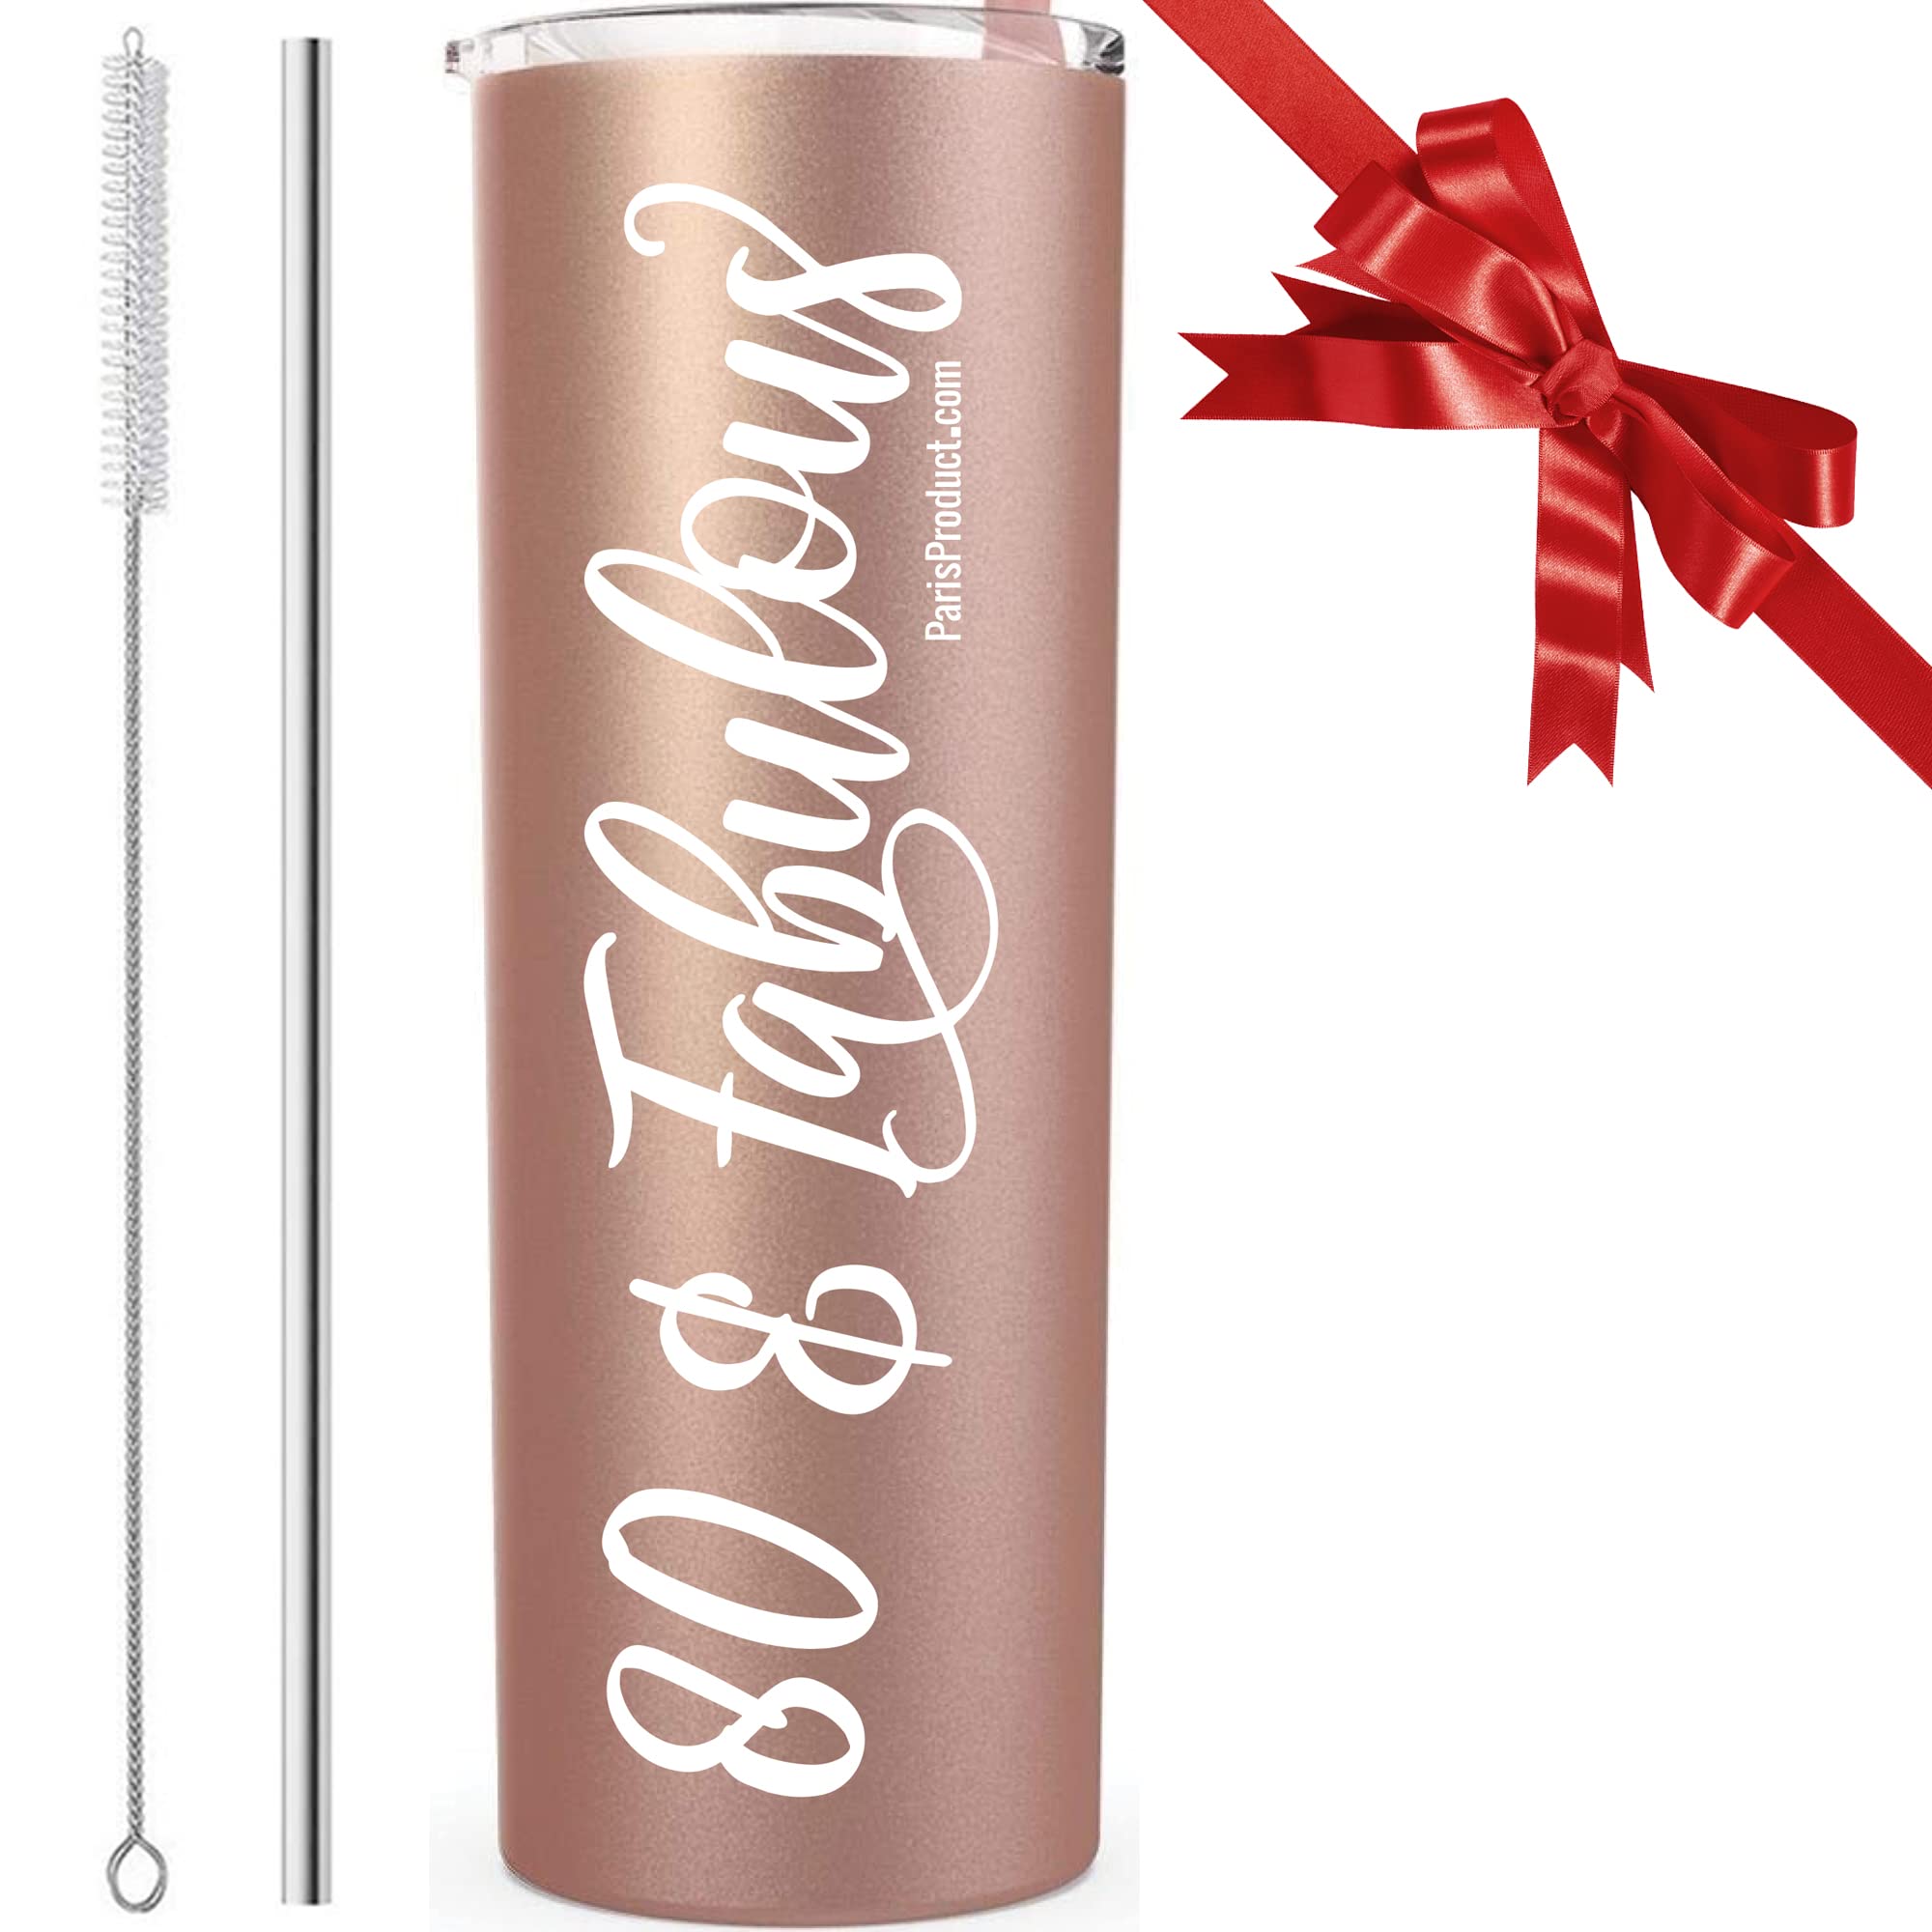 PARIS PRODUcTS cO As Seen On FOX, ABc, NBc, cBS NEWS - 20 Oz Stainless Steel Tumbler 80th Birthday gifts For Women, 80th Birthda